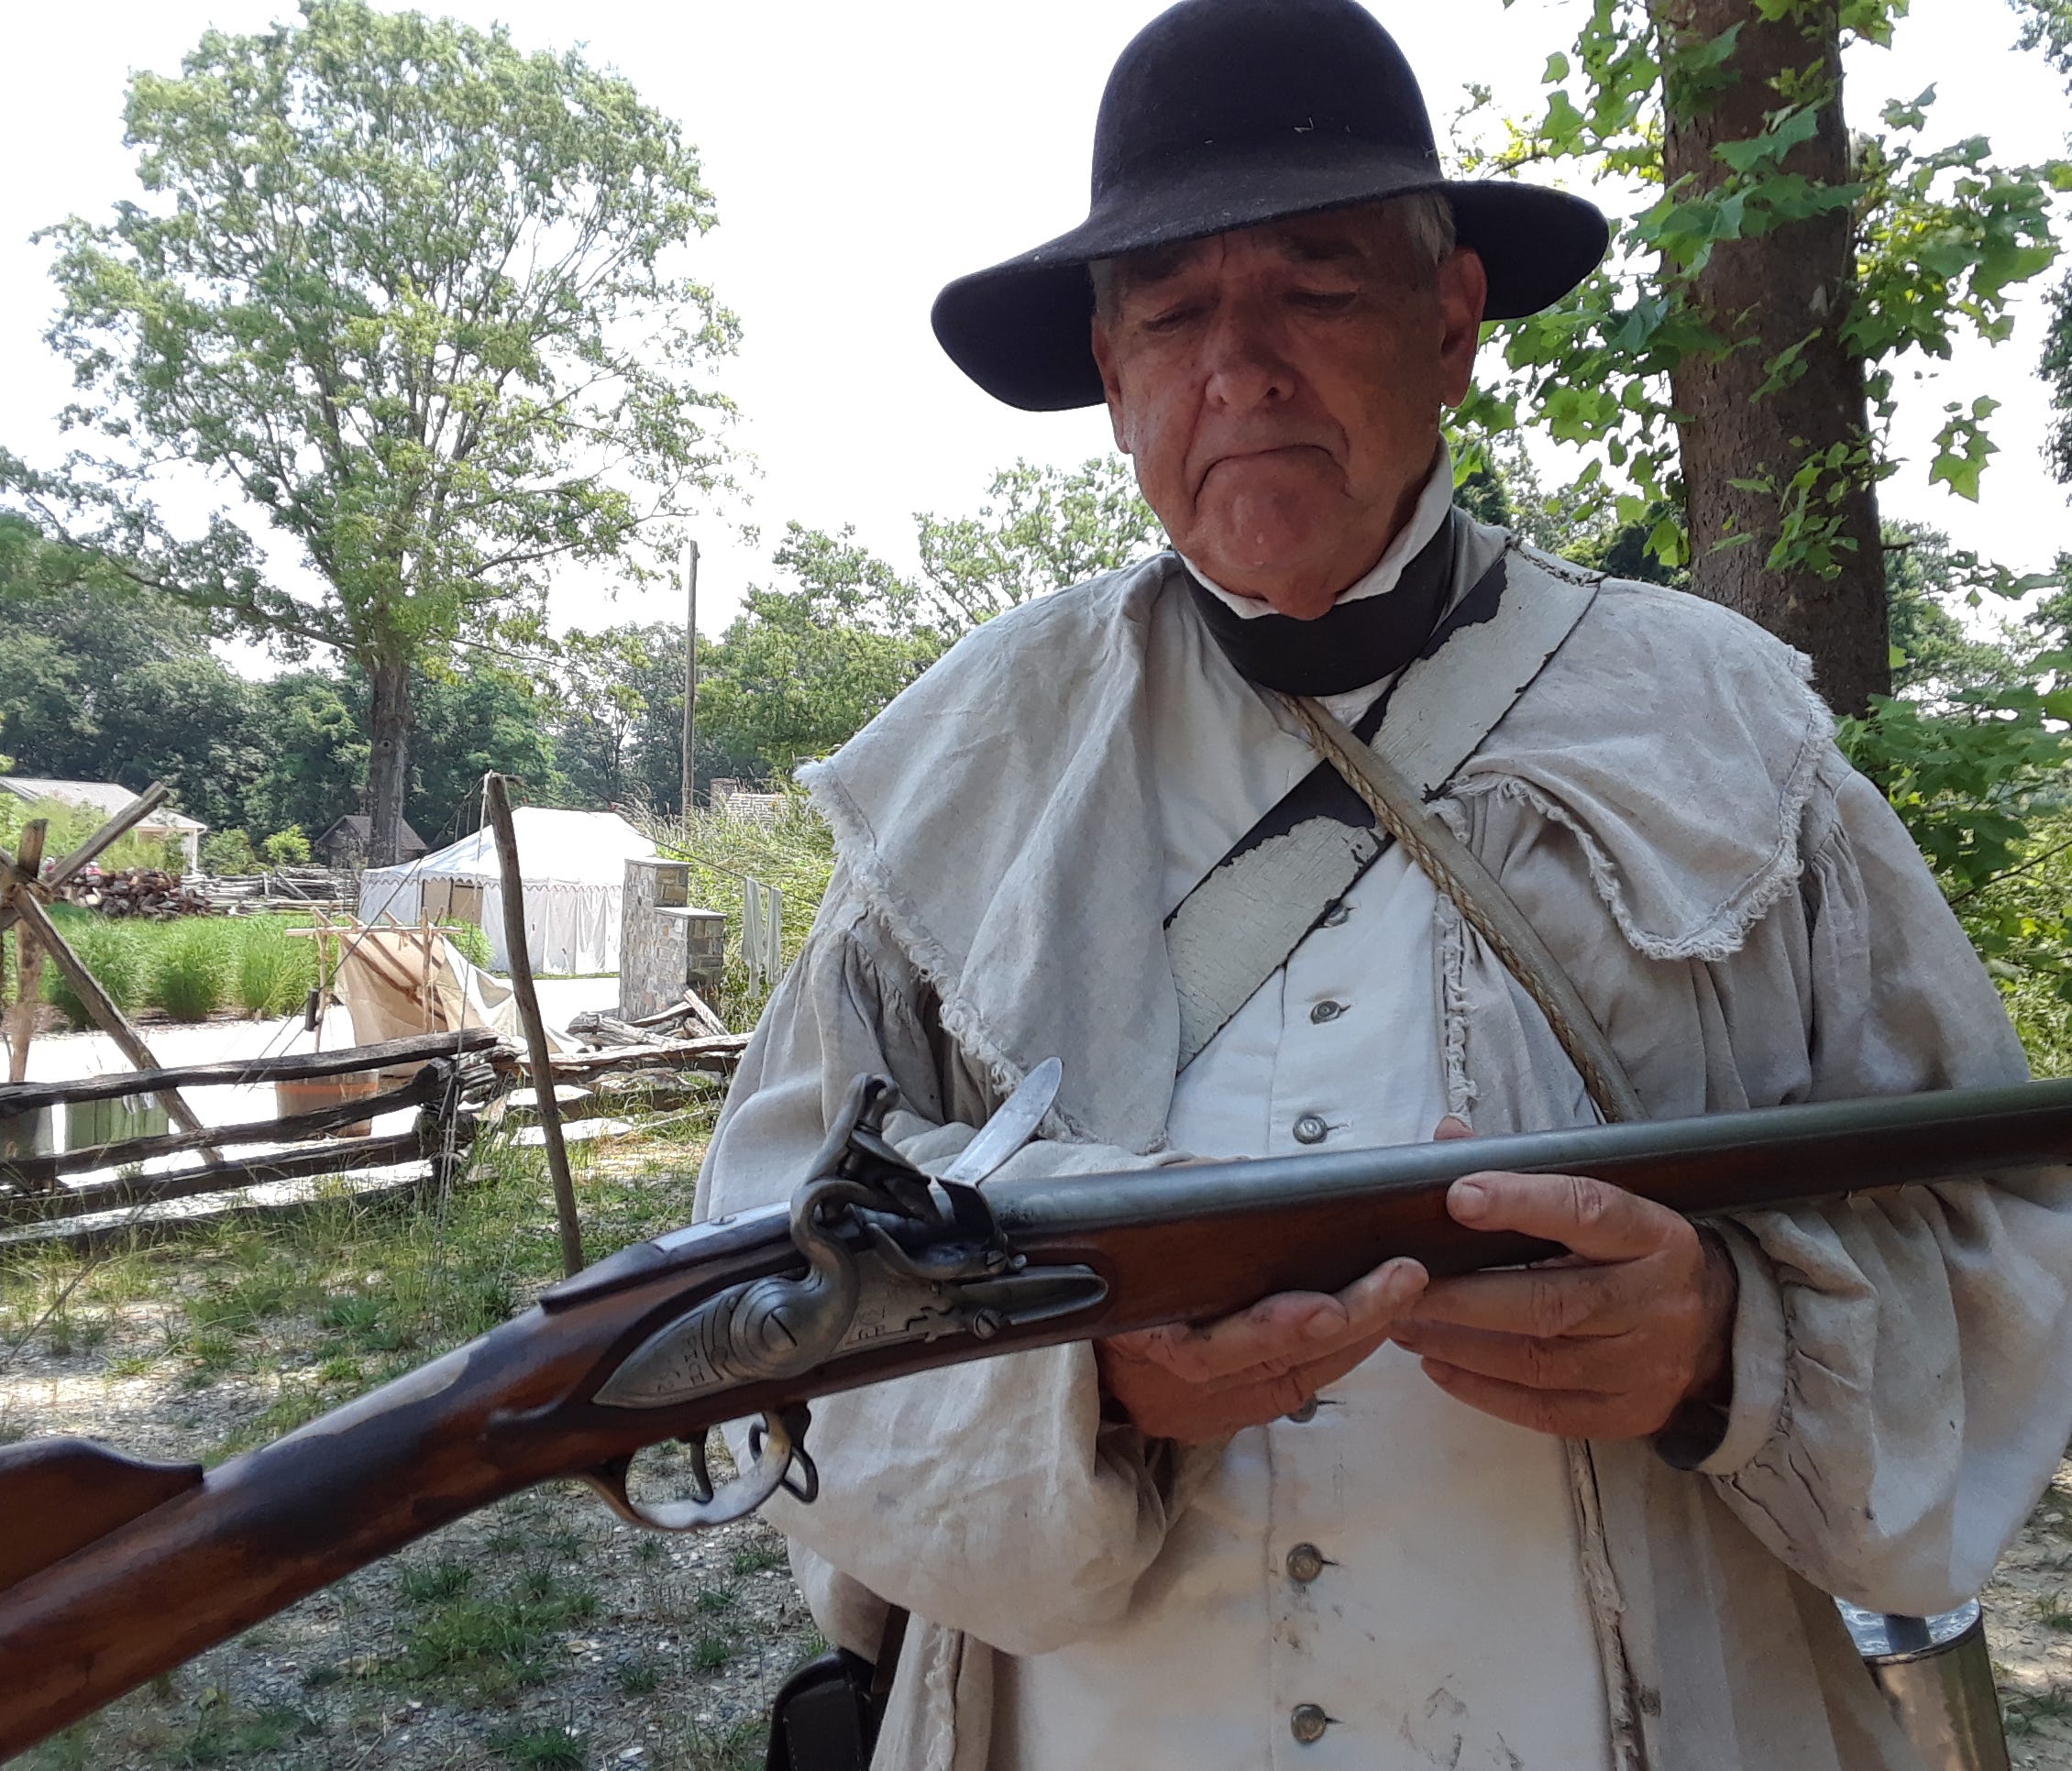 Bittner demonstrates for visitors the step-by-step process of loading and firing a musket. A well-drilled soldier or militiaman could fire three times per minute.